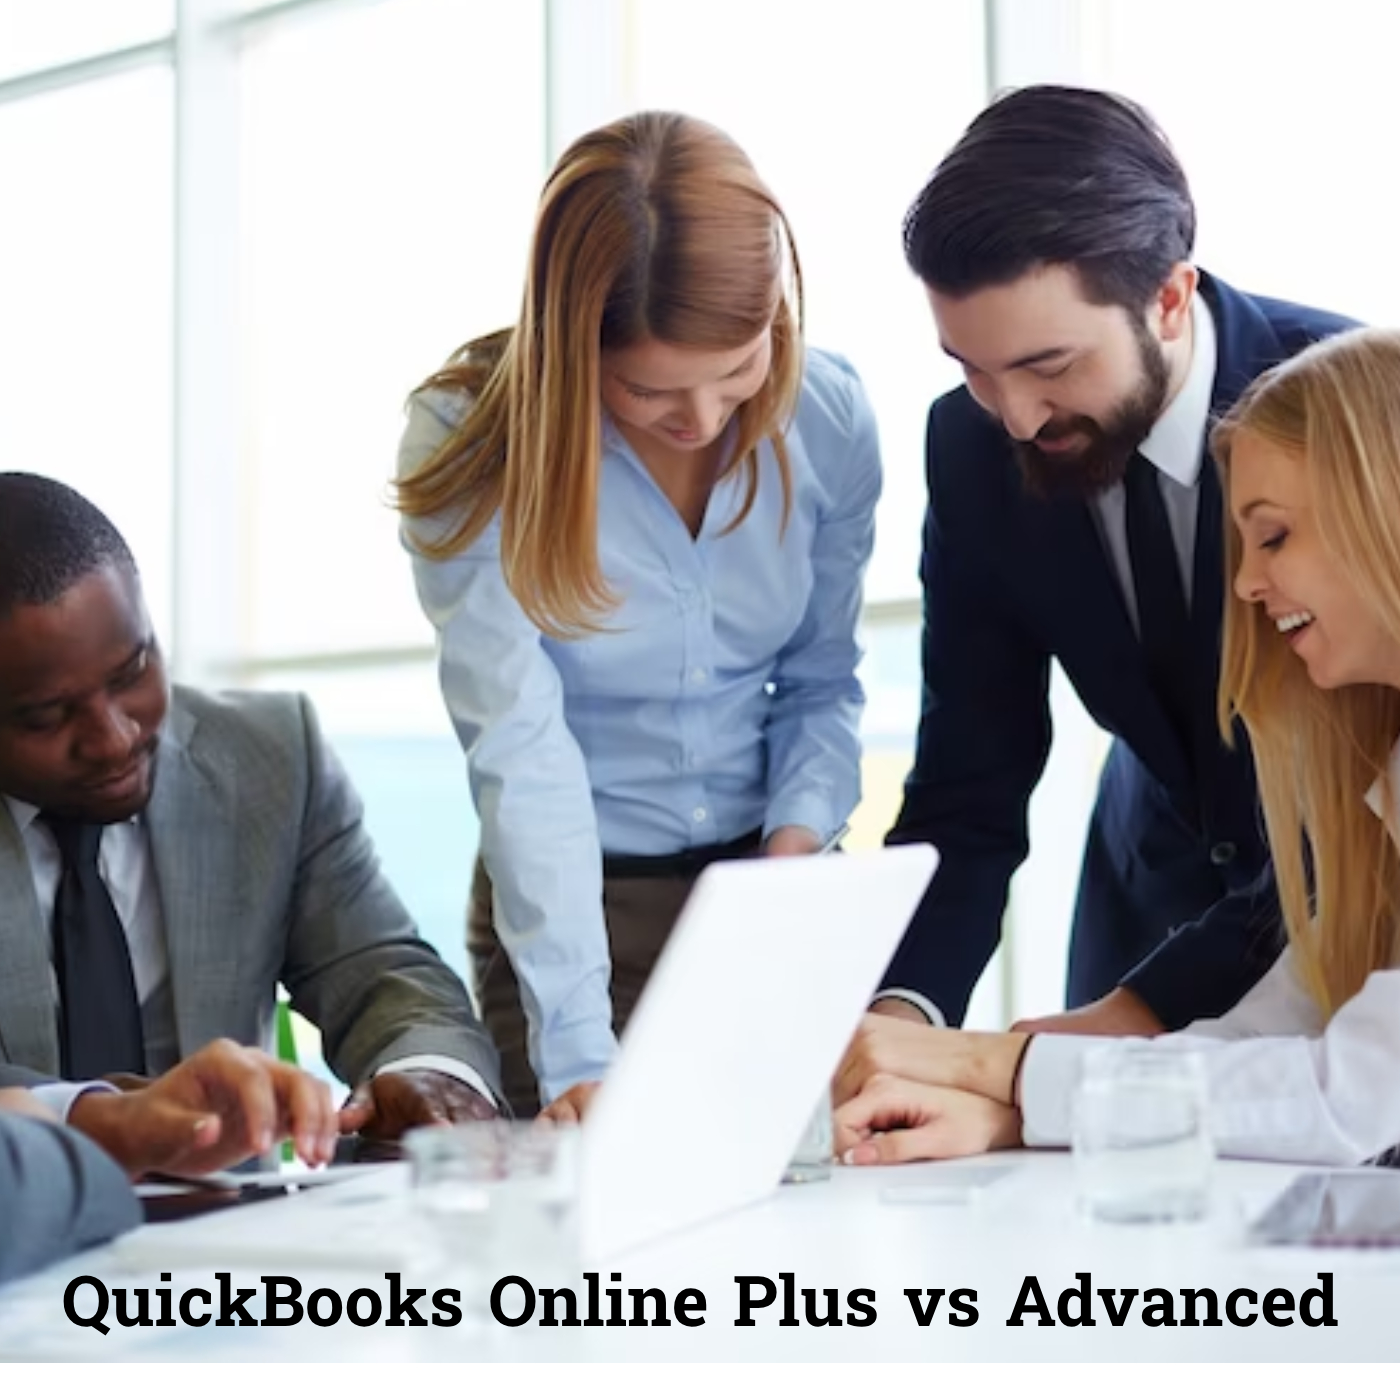 QuickBooks Online Plus vs Advanced: Which One is Right for Your Business?